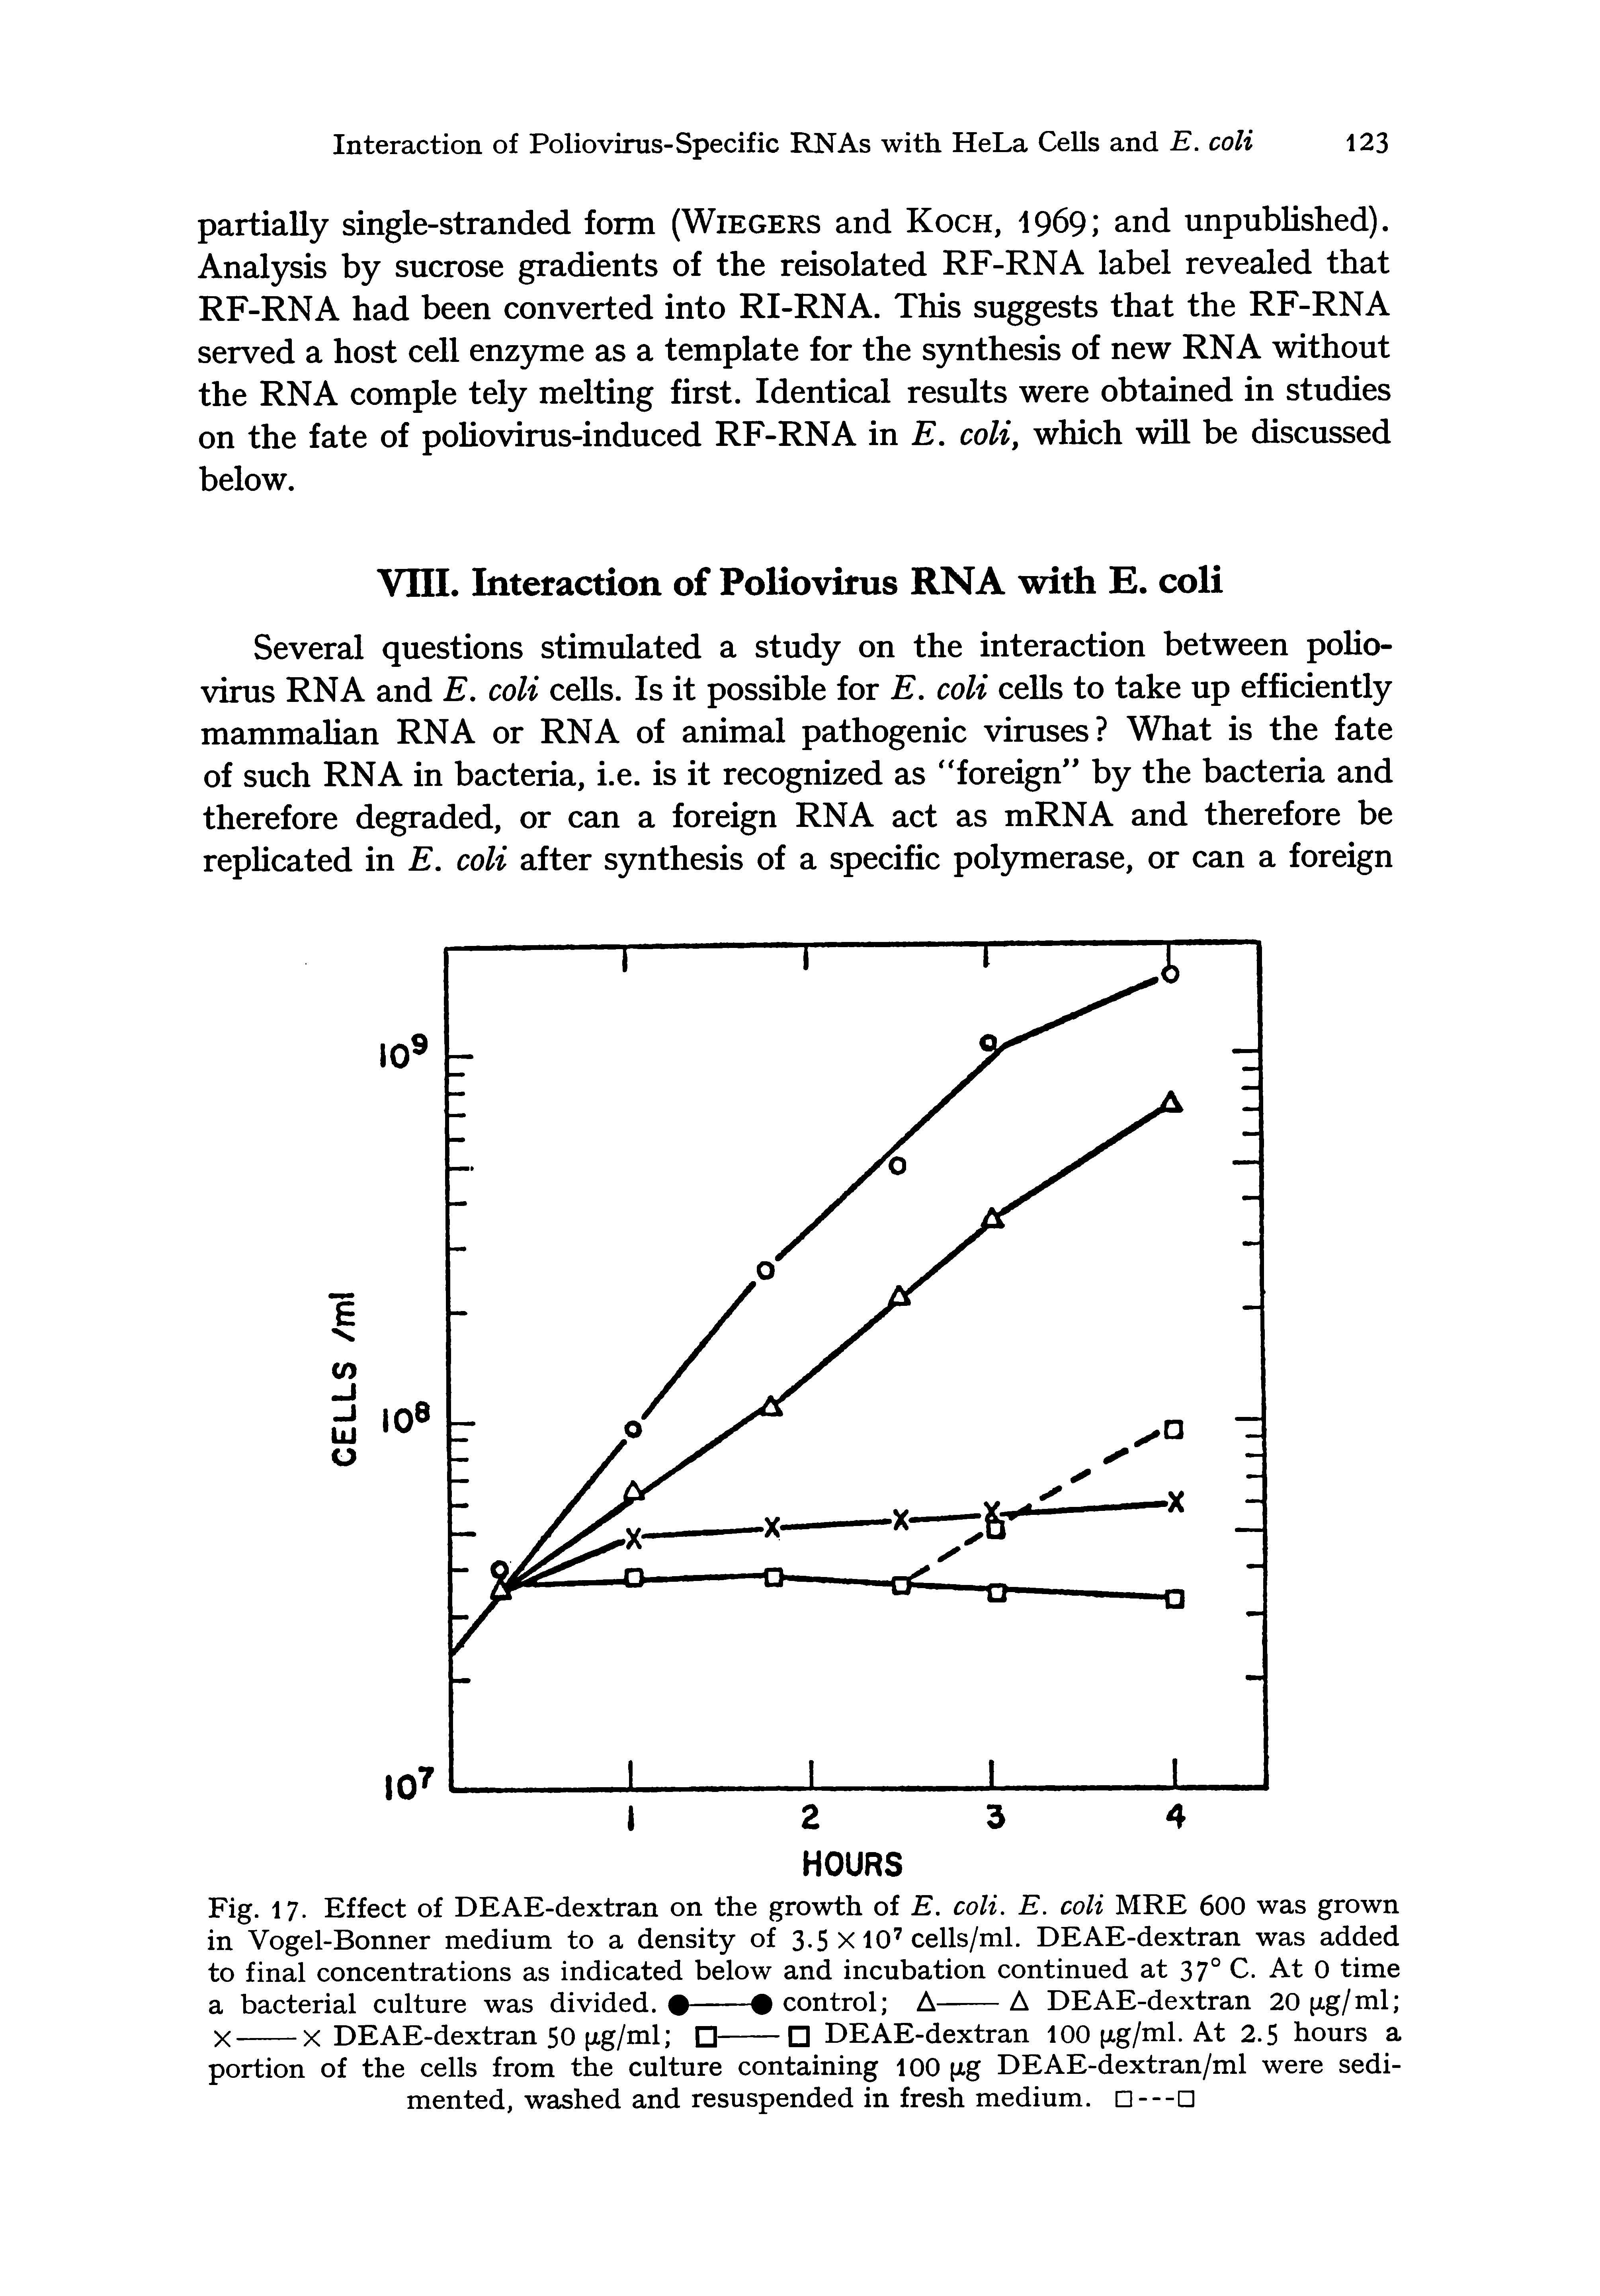 Fig. 17. Effect of DEAE-dextran on the growth of E, coli. E. coli MRE 600 was grown in Vogel-Bonner medium to a density of 3-5 X 10 cells/ml. DEAE-dextran was added to final concentrations as indicated below and incubation continued at 37° C. At 0 time...